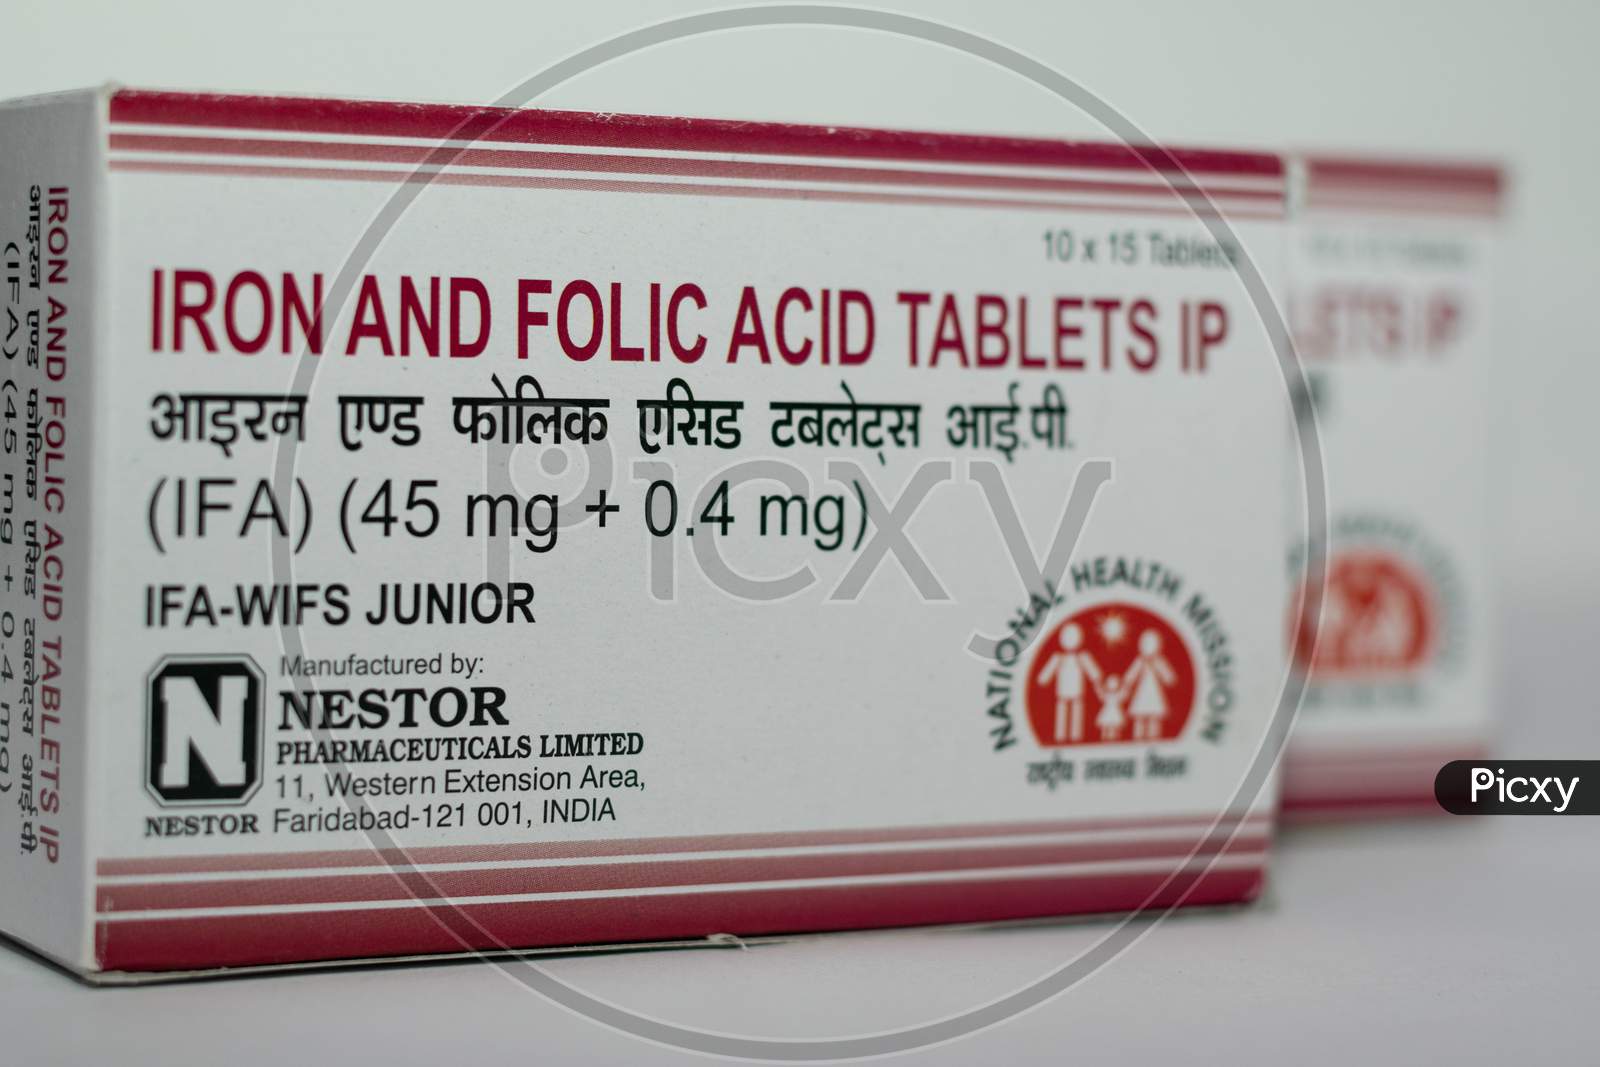 Image Of Iron And Folic Acid Tablets Provided Free By Government To Reduce The Prevalence And Severity Of Anaemia In Population 5 10 Years Kl Picxy